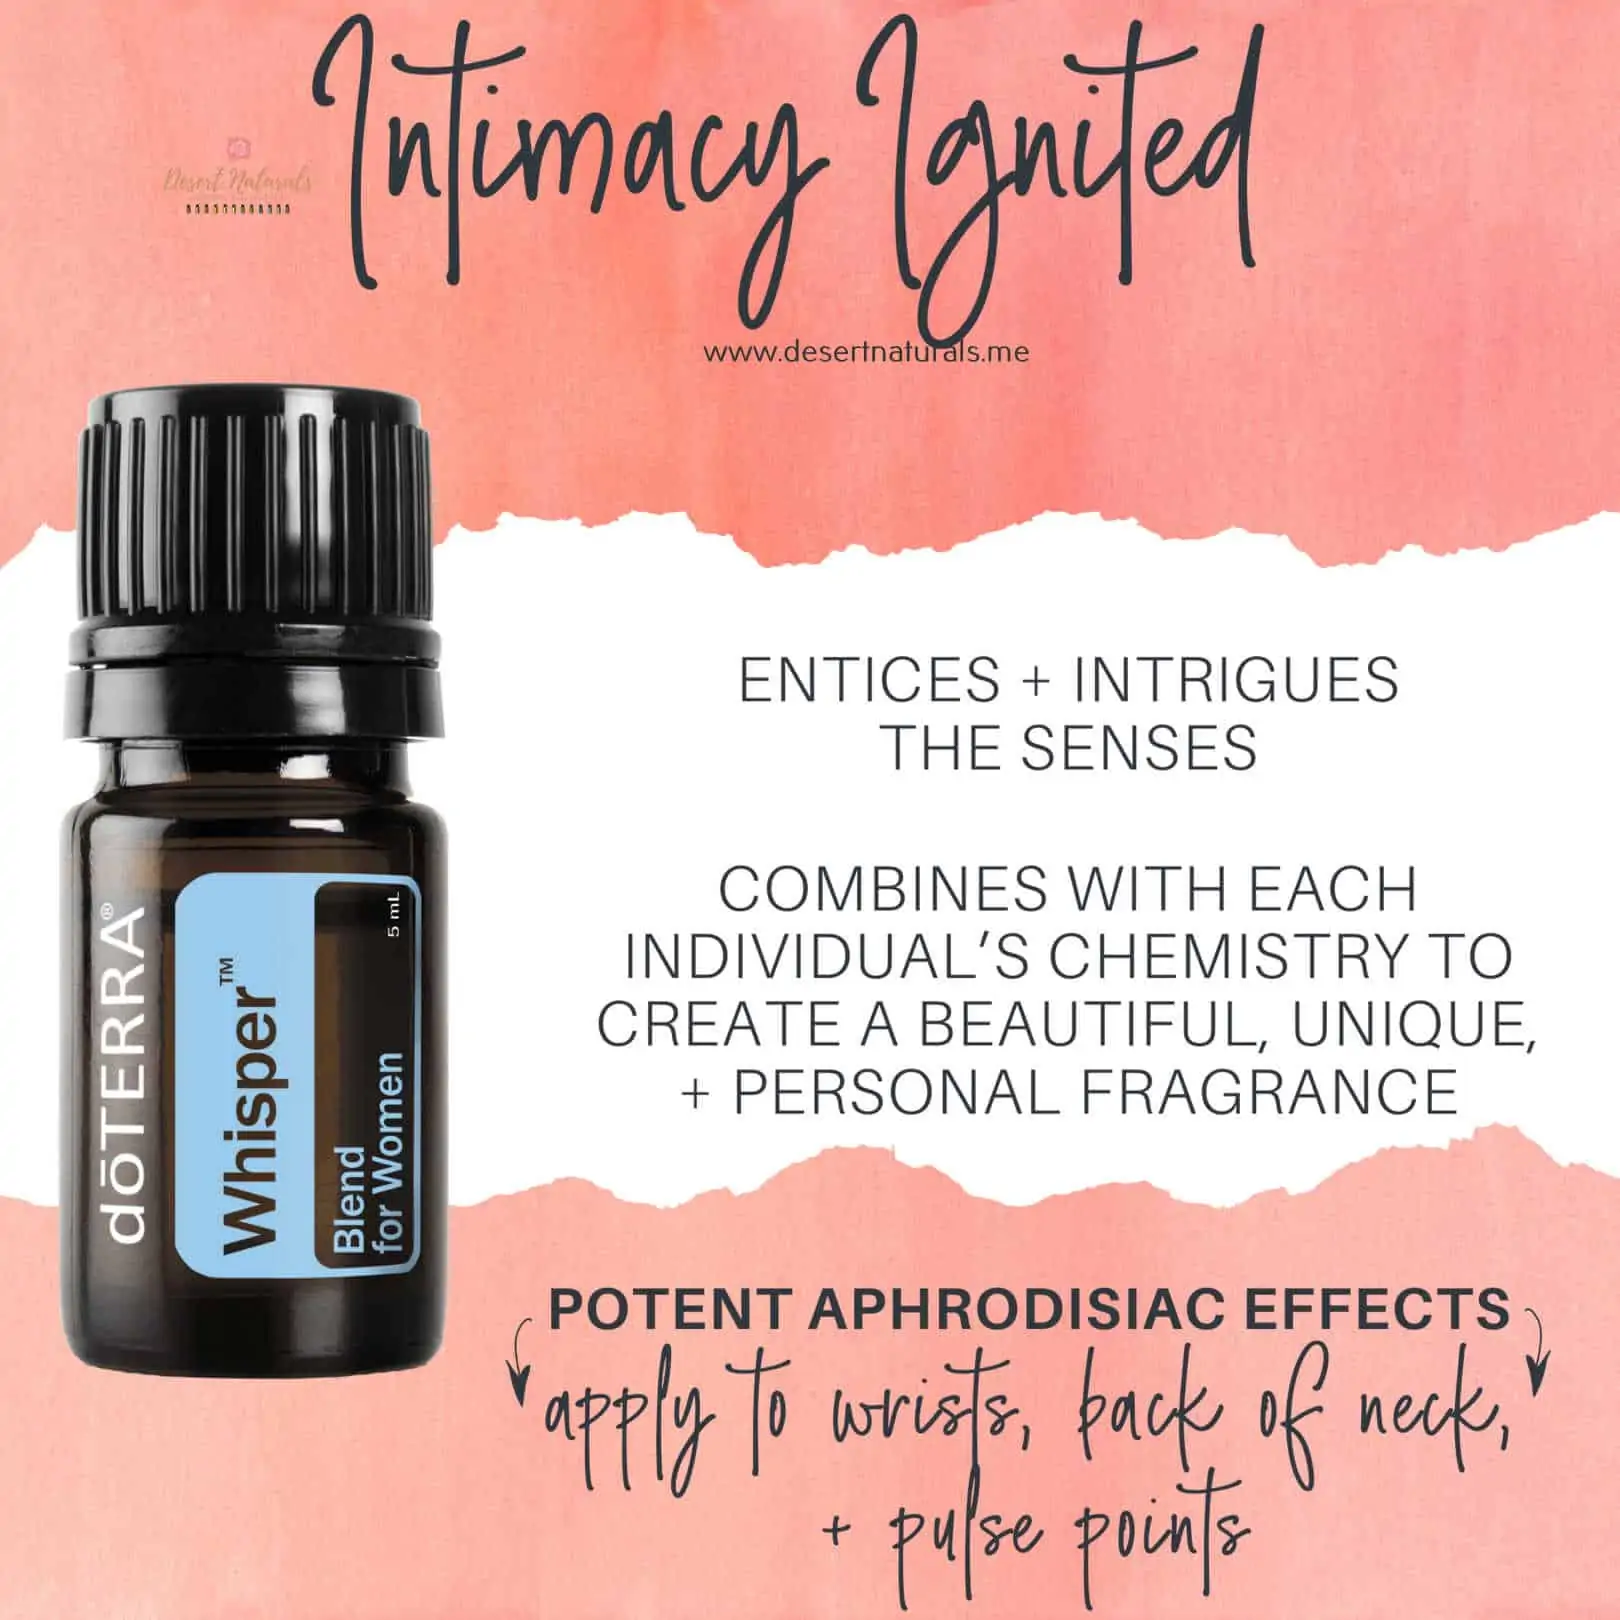 Whisper essential oil is perfect for romance and valentine's day